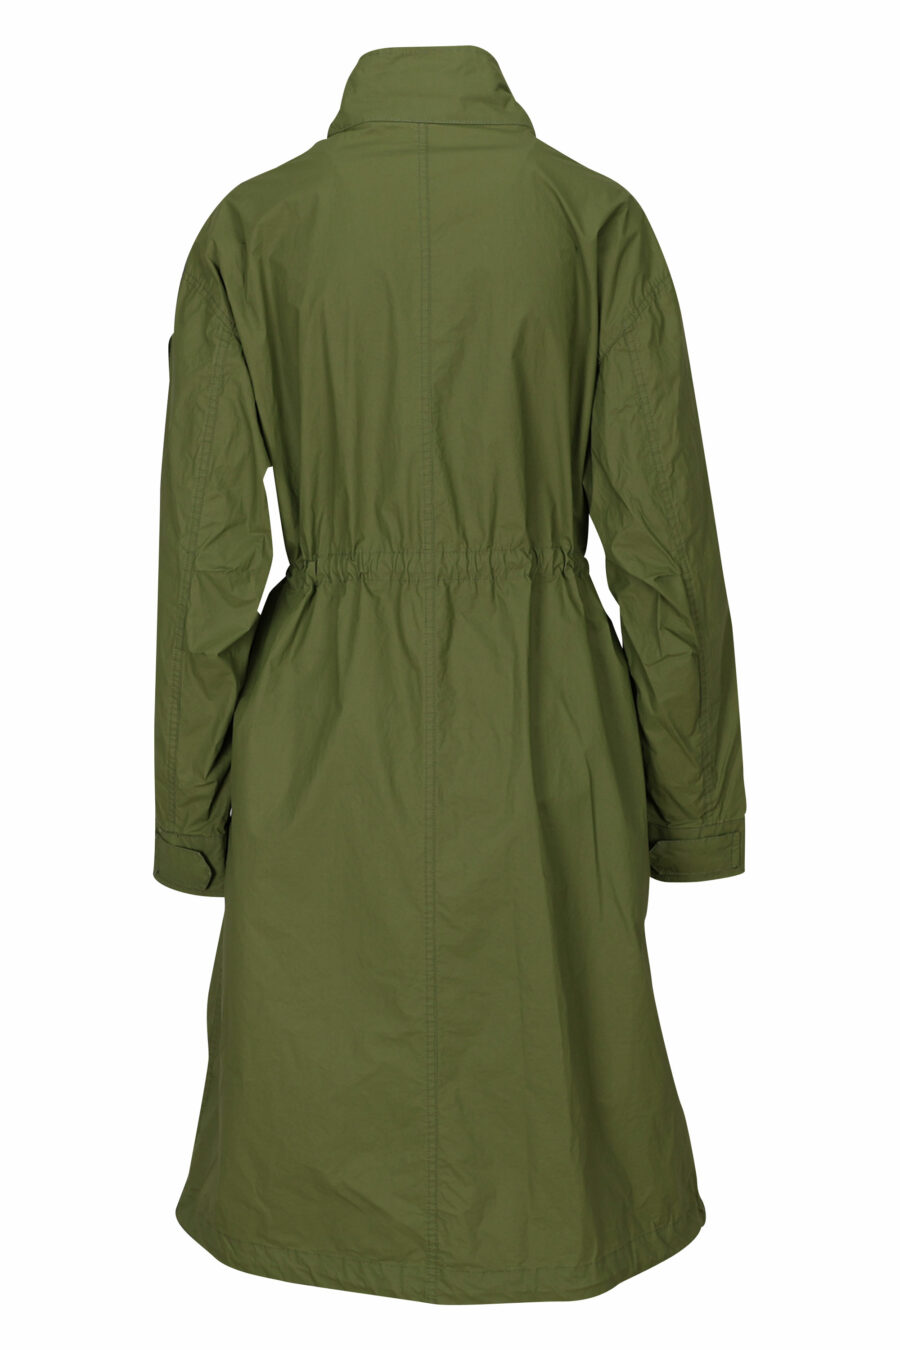 Military green waterproof trench coat with side logo - 8058610764999 2